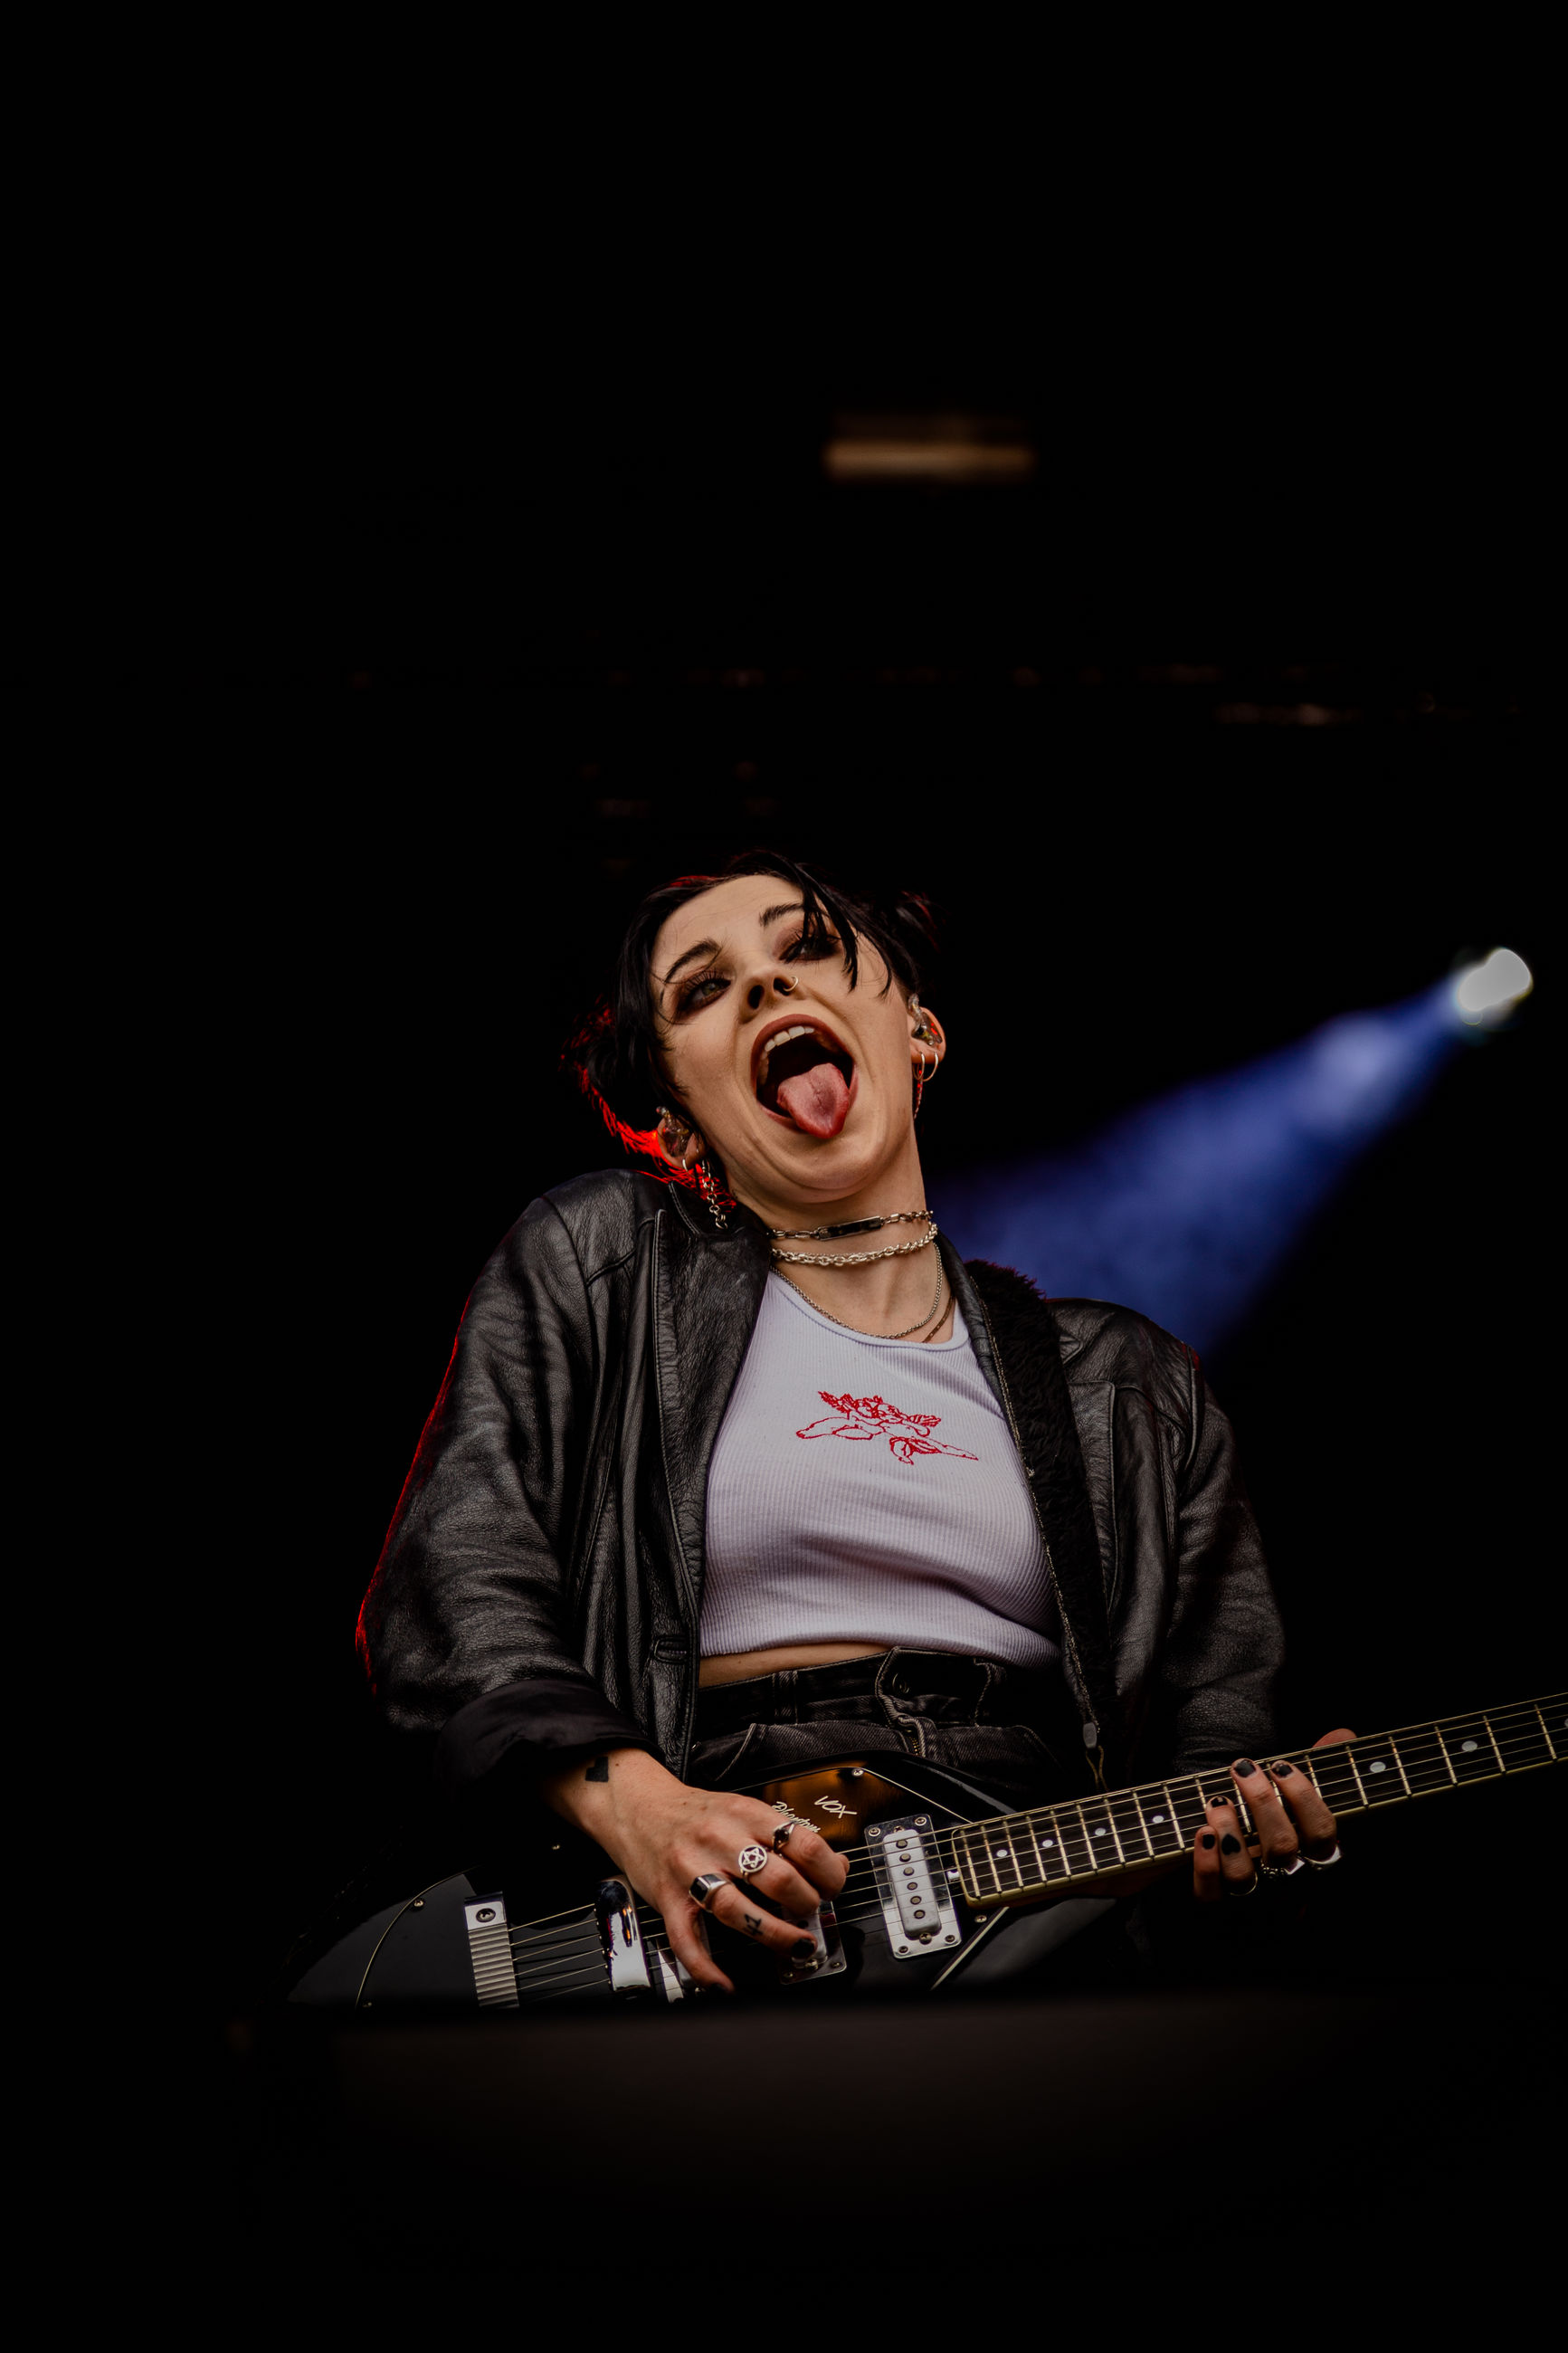 performance, mouth open, mouth, one person, music, front view, three quarter length, arts culture and entertainment, indoors, casual clothing, singing, young adult, young women, real people, leisure activity, musician, musical instrument, lifestyles, enjoyment, black background, stage, excitement, rock music, popular music concert